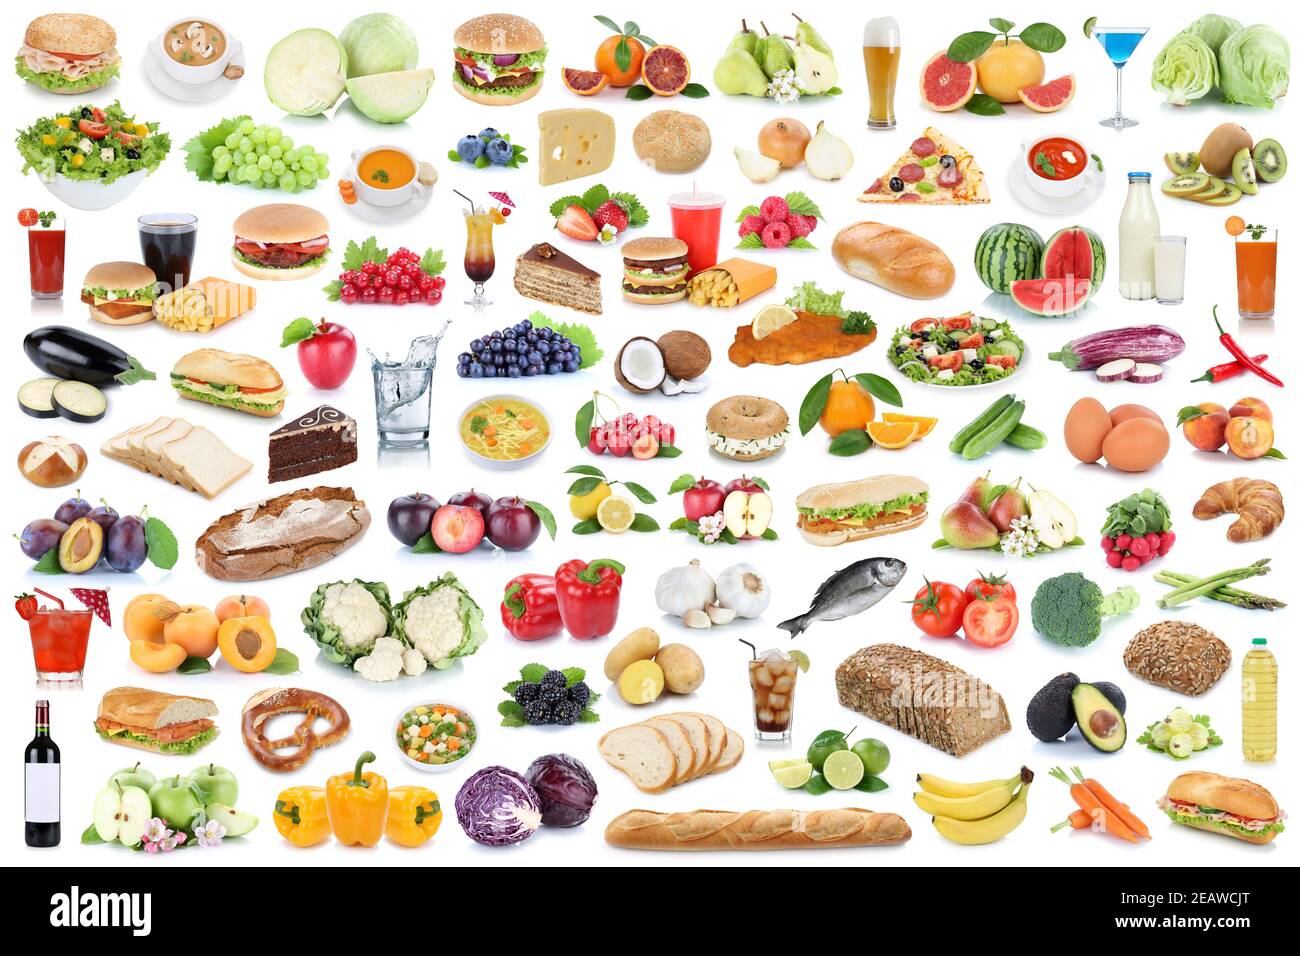 Food and drink collection background collage healthy eating fruits vegetables fruit drinks isolated Stock Photo